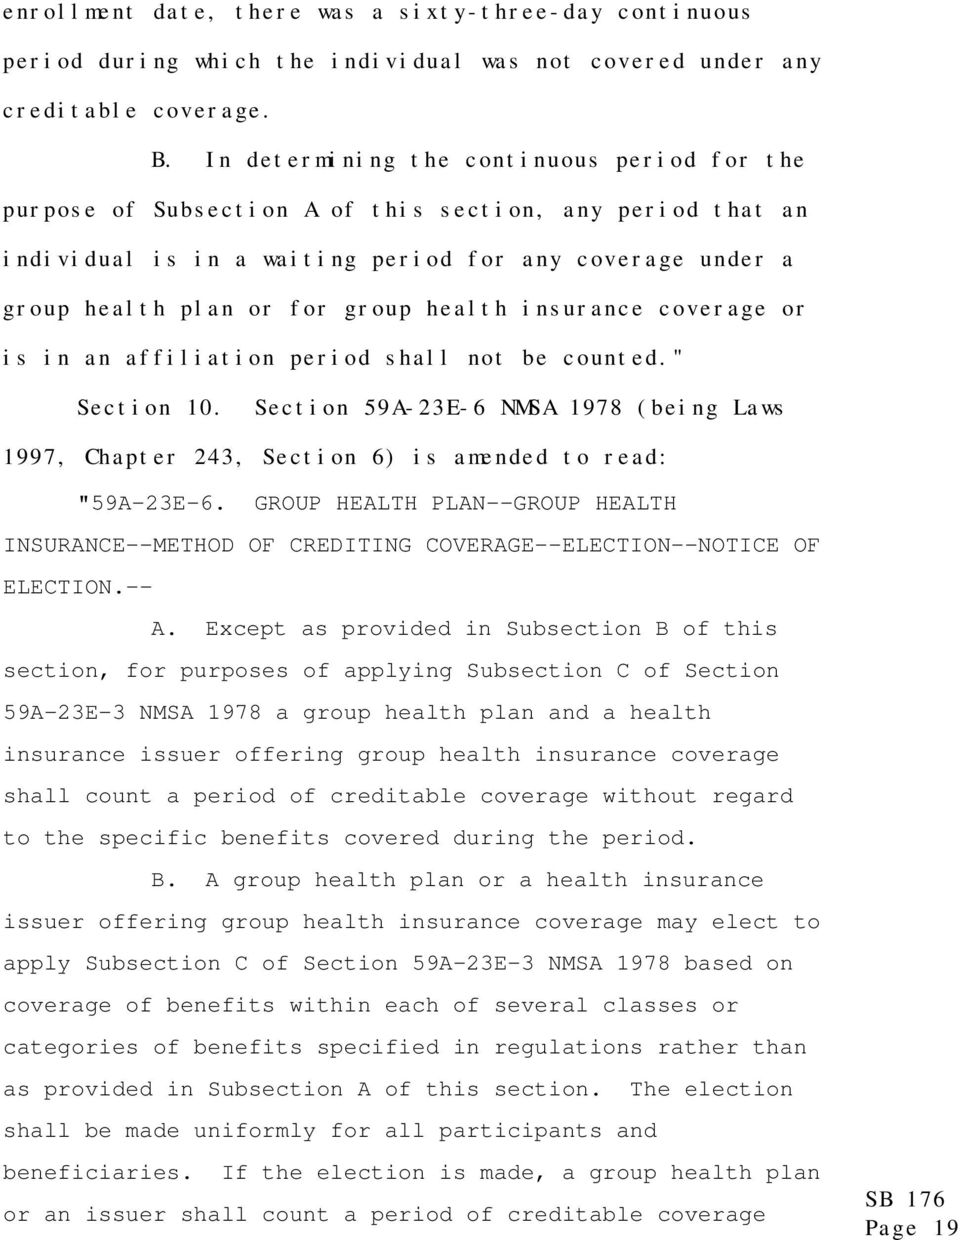 health insurance coverage or is in an affiliation period shall not be counted." Section 10. Section 59A-23E-6 NMSA 1978 (being Laws 1997, Chapter 243, Section 6) is amended to read: "59A-23E-6.